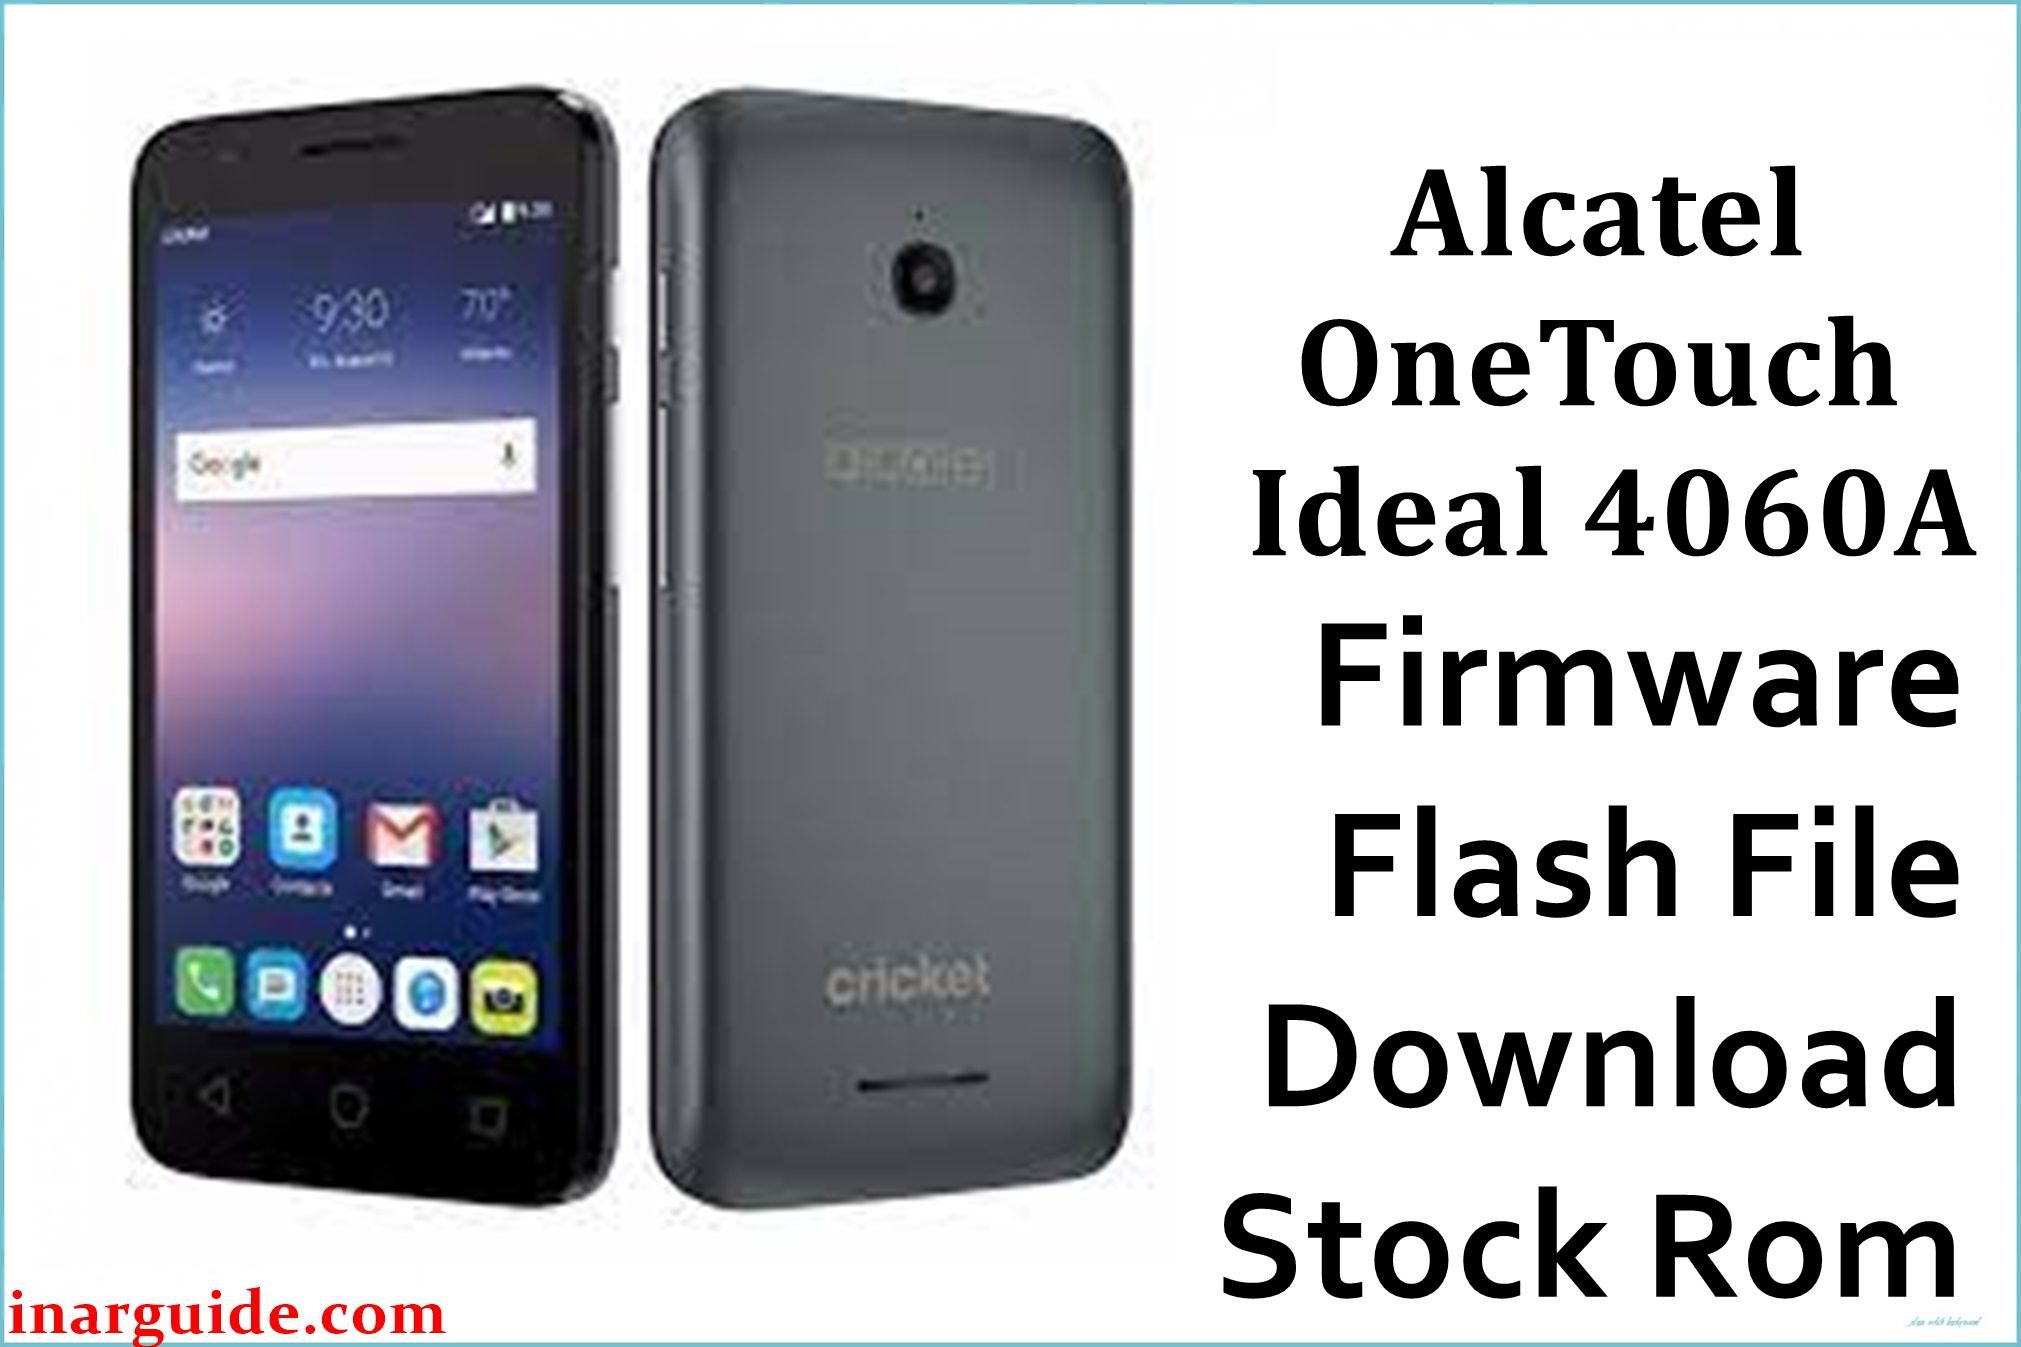 Alcatel OneTouch Ideal 4060A